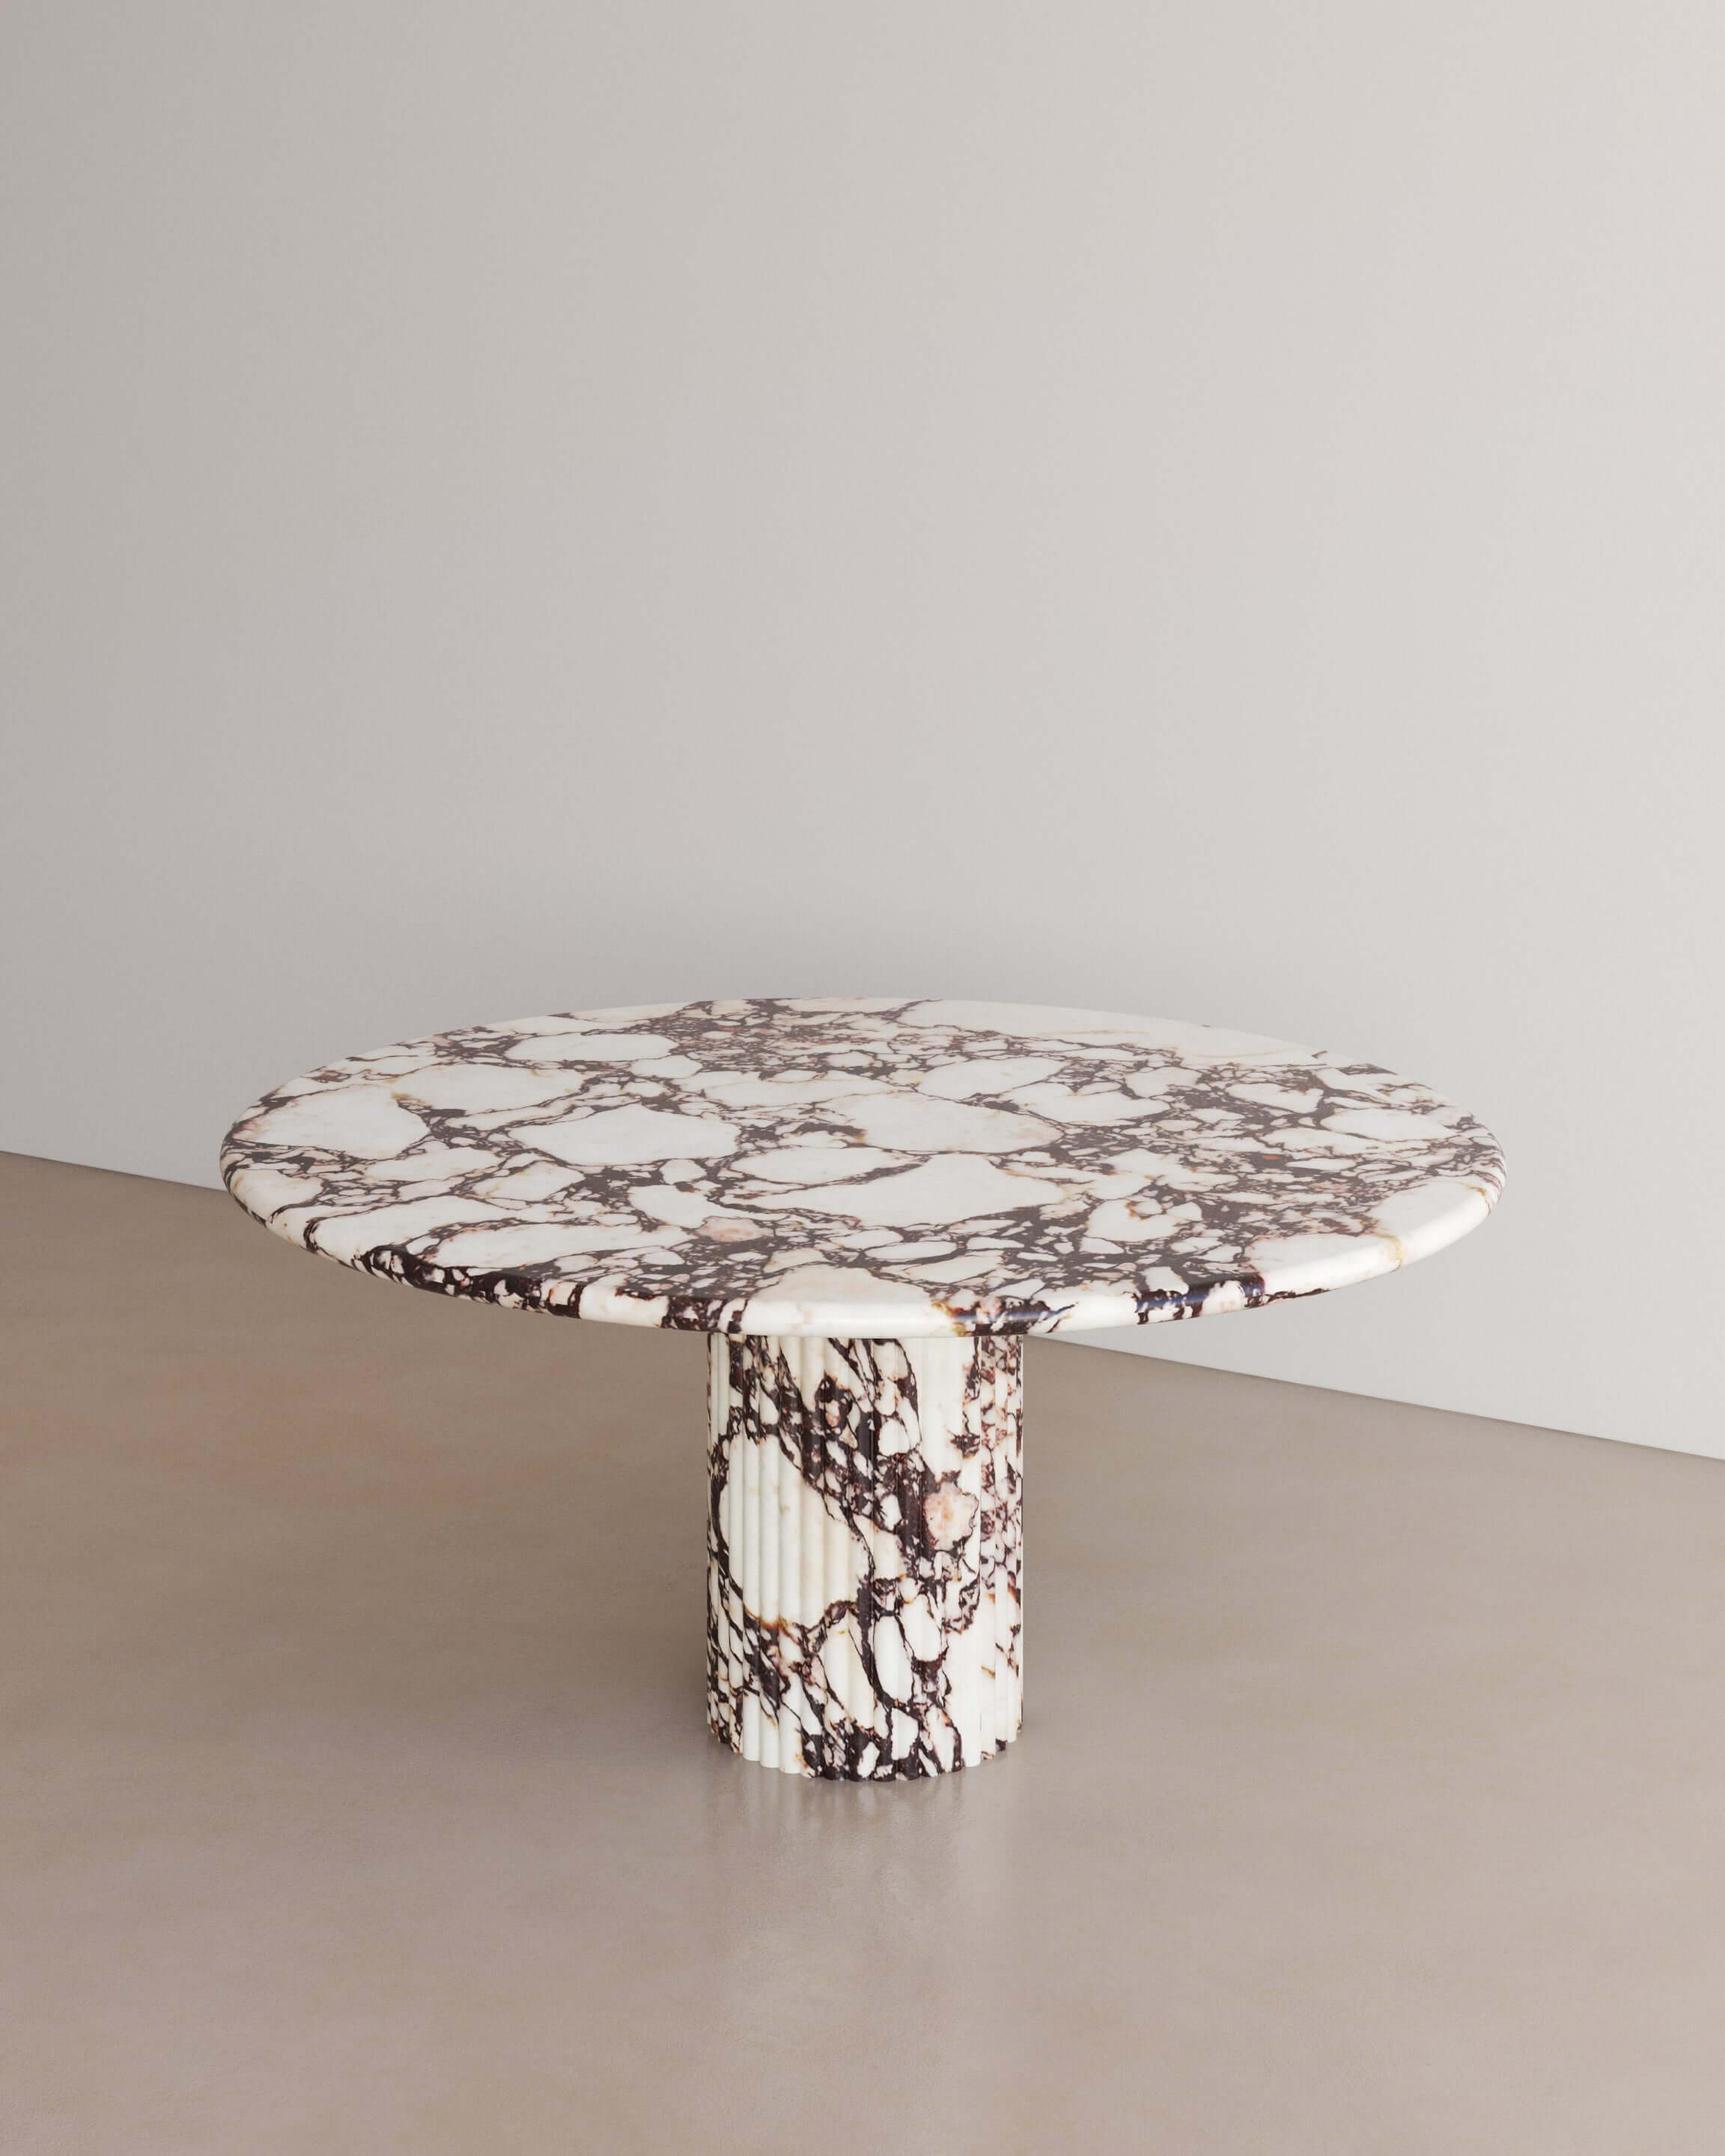 The Essentialist brings you The Antica dining table I in Calacatta Viola Marble . An oval table top resolved by smooth bullnose edges rests on two supporting pillars. Architectural form is refined by artistic expression echoing Roman culture. This